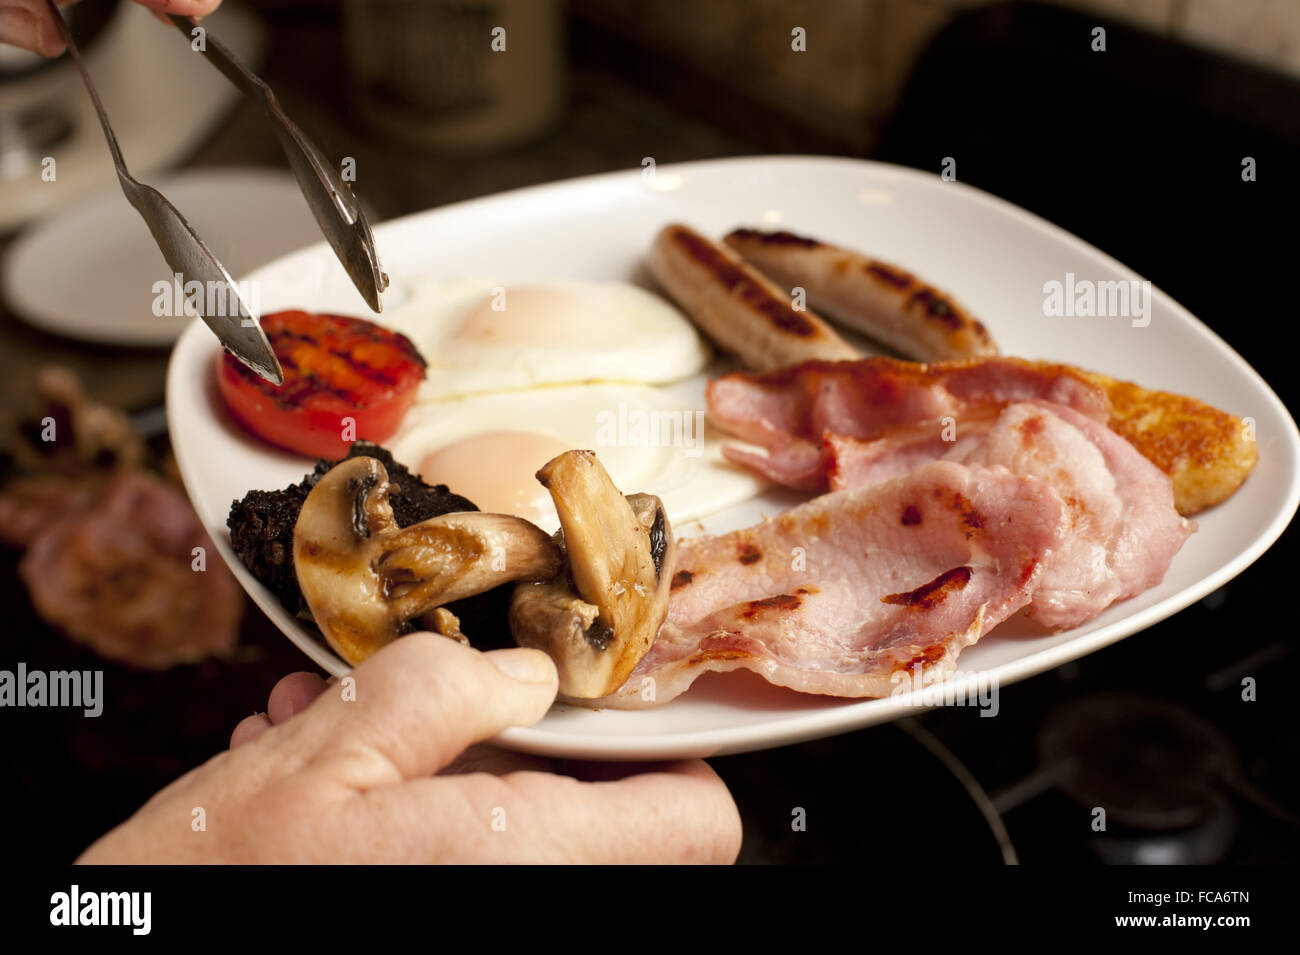 Wholesome cooked English breakfast Stock Photo